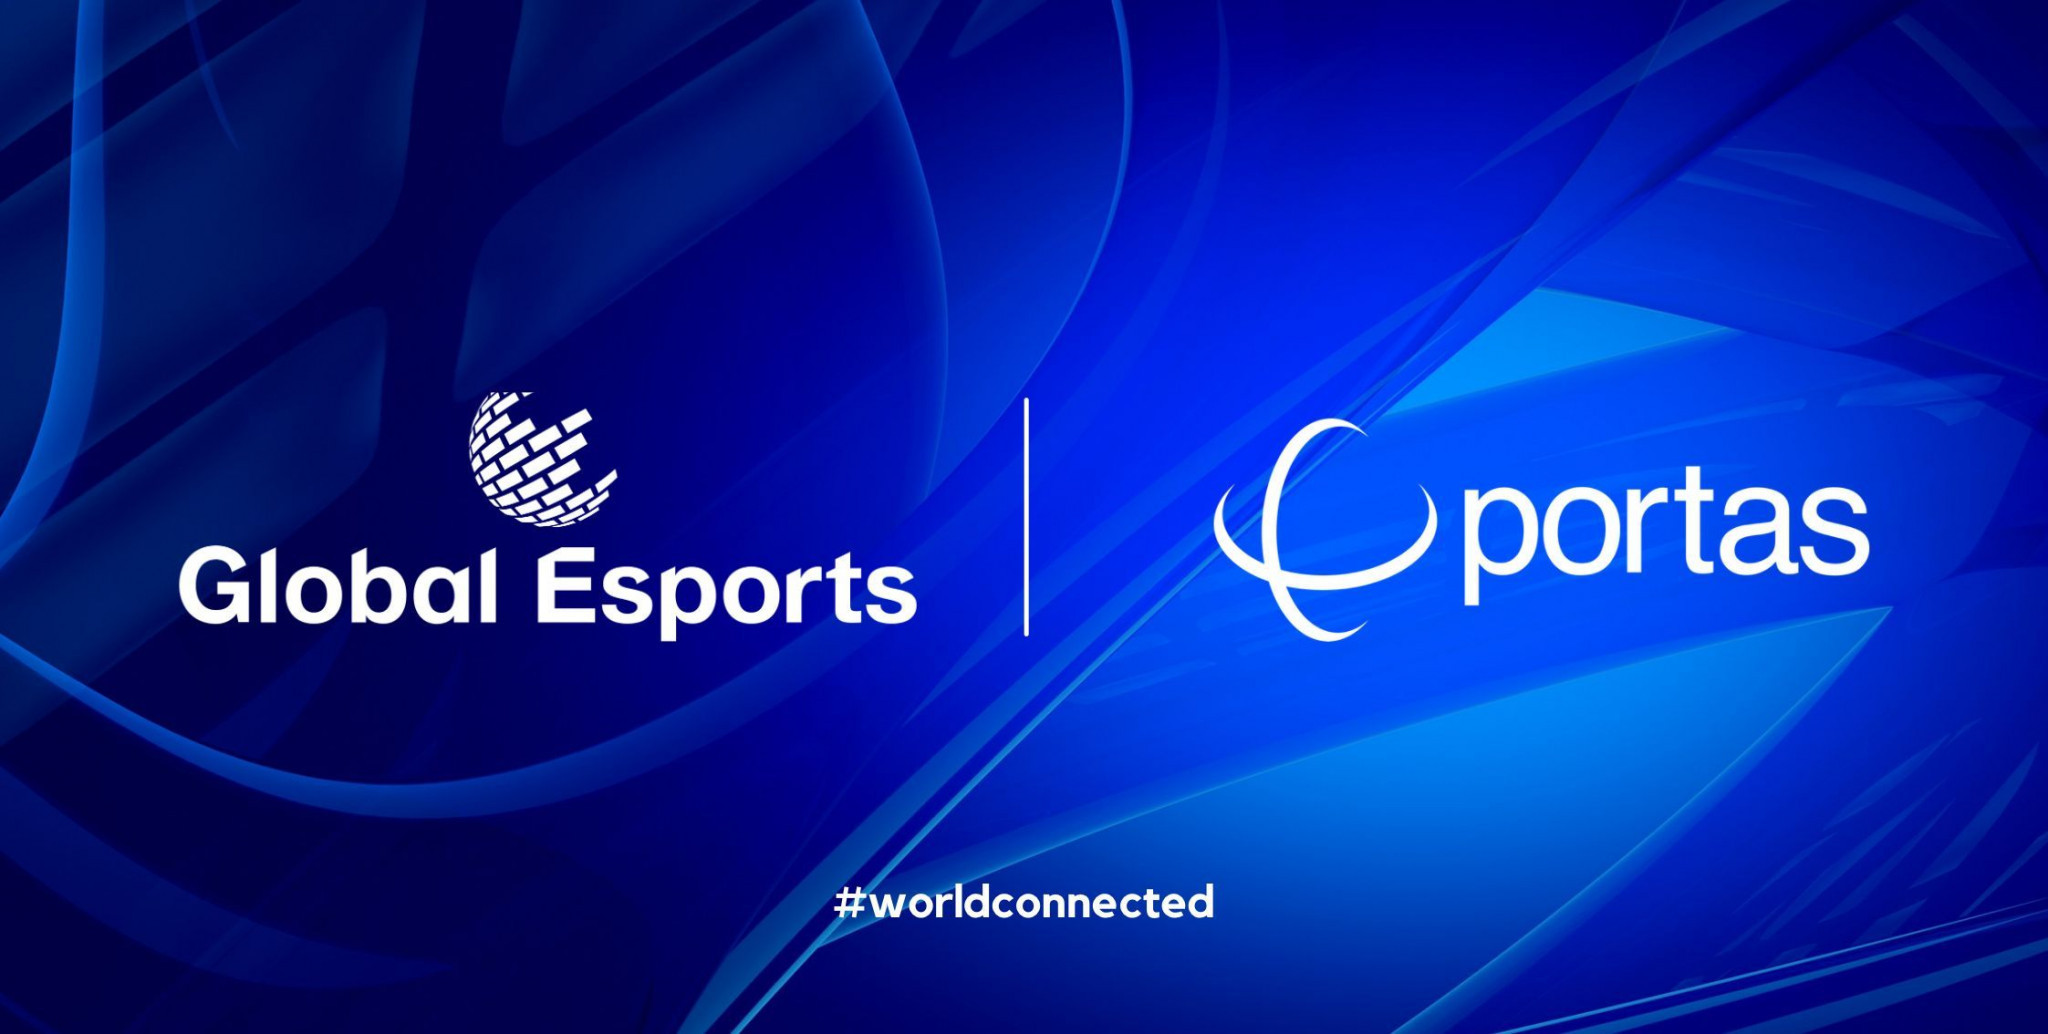 The Global Esports Federation has partnered with Portas Consulting ©GEF